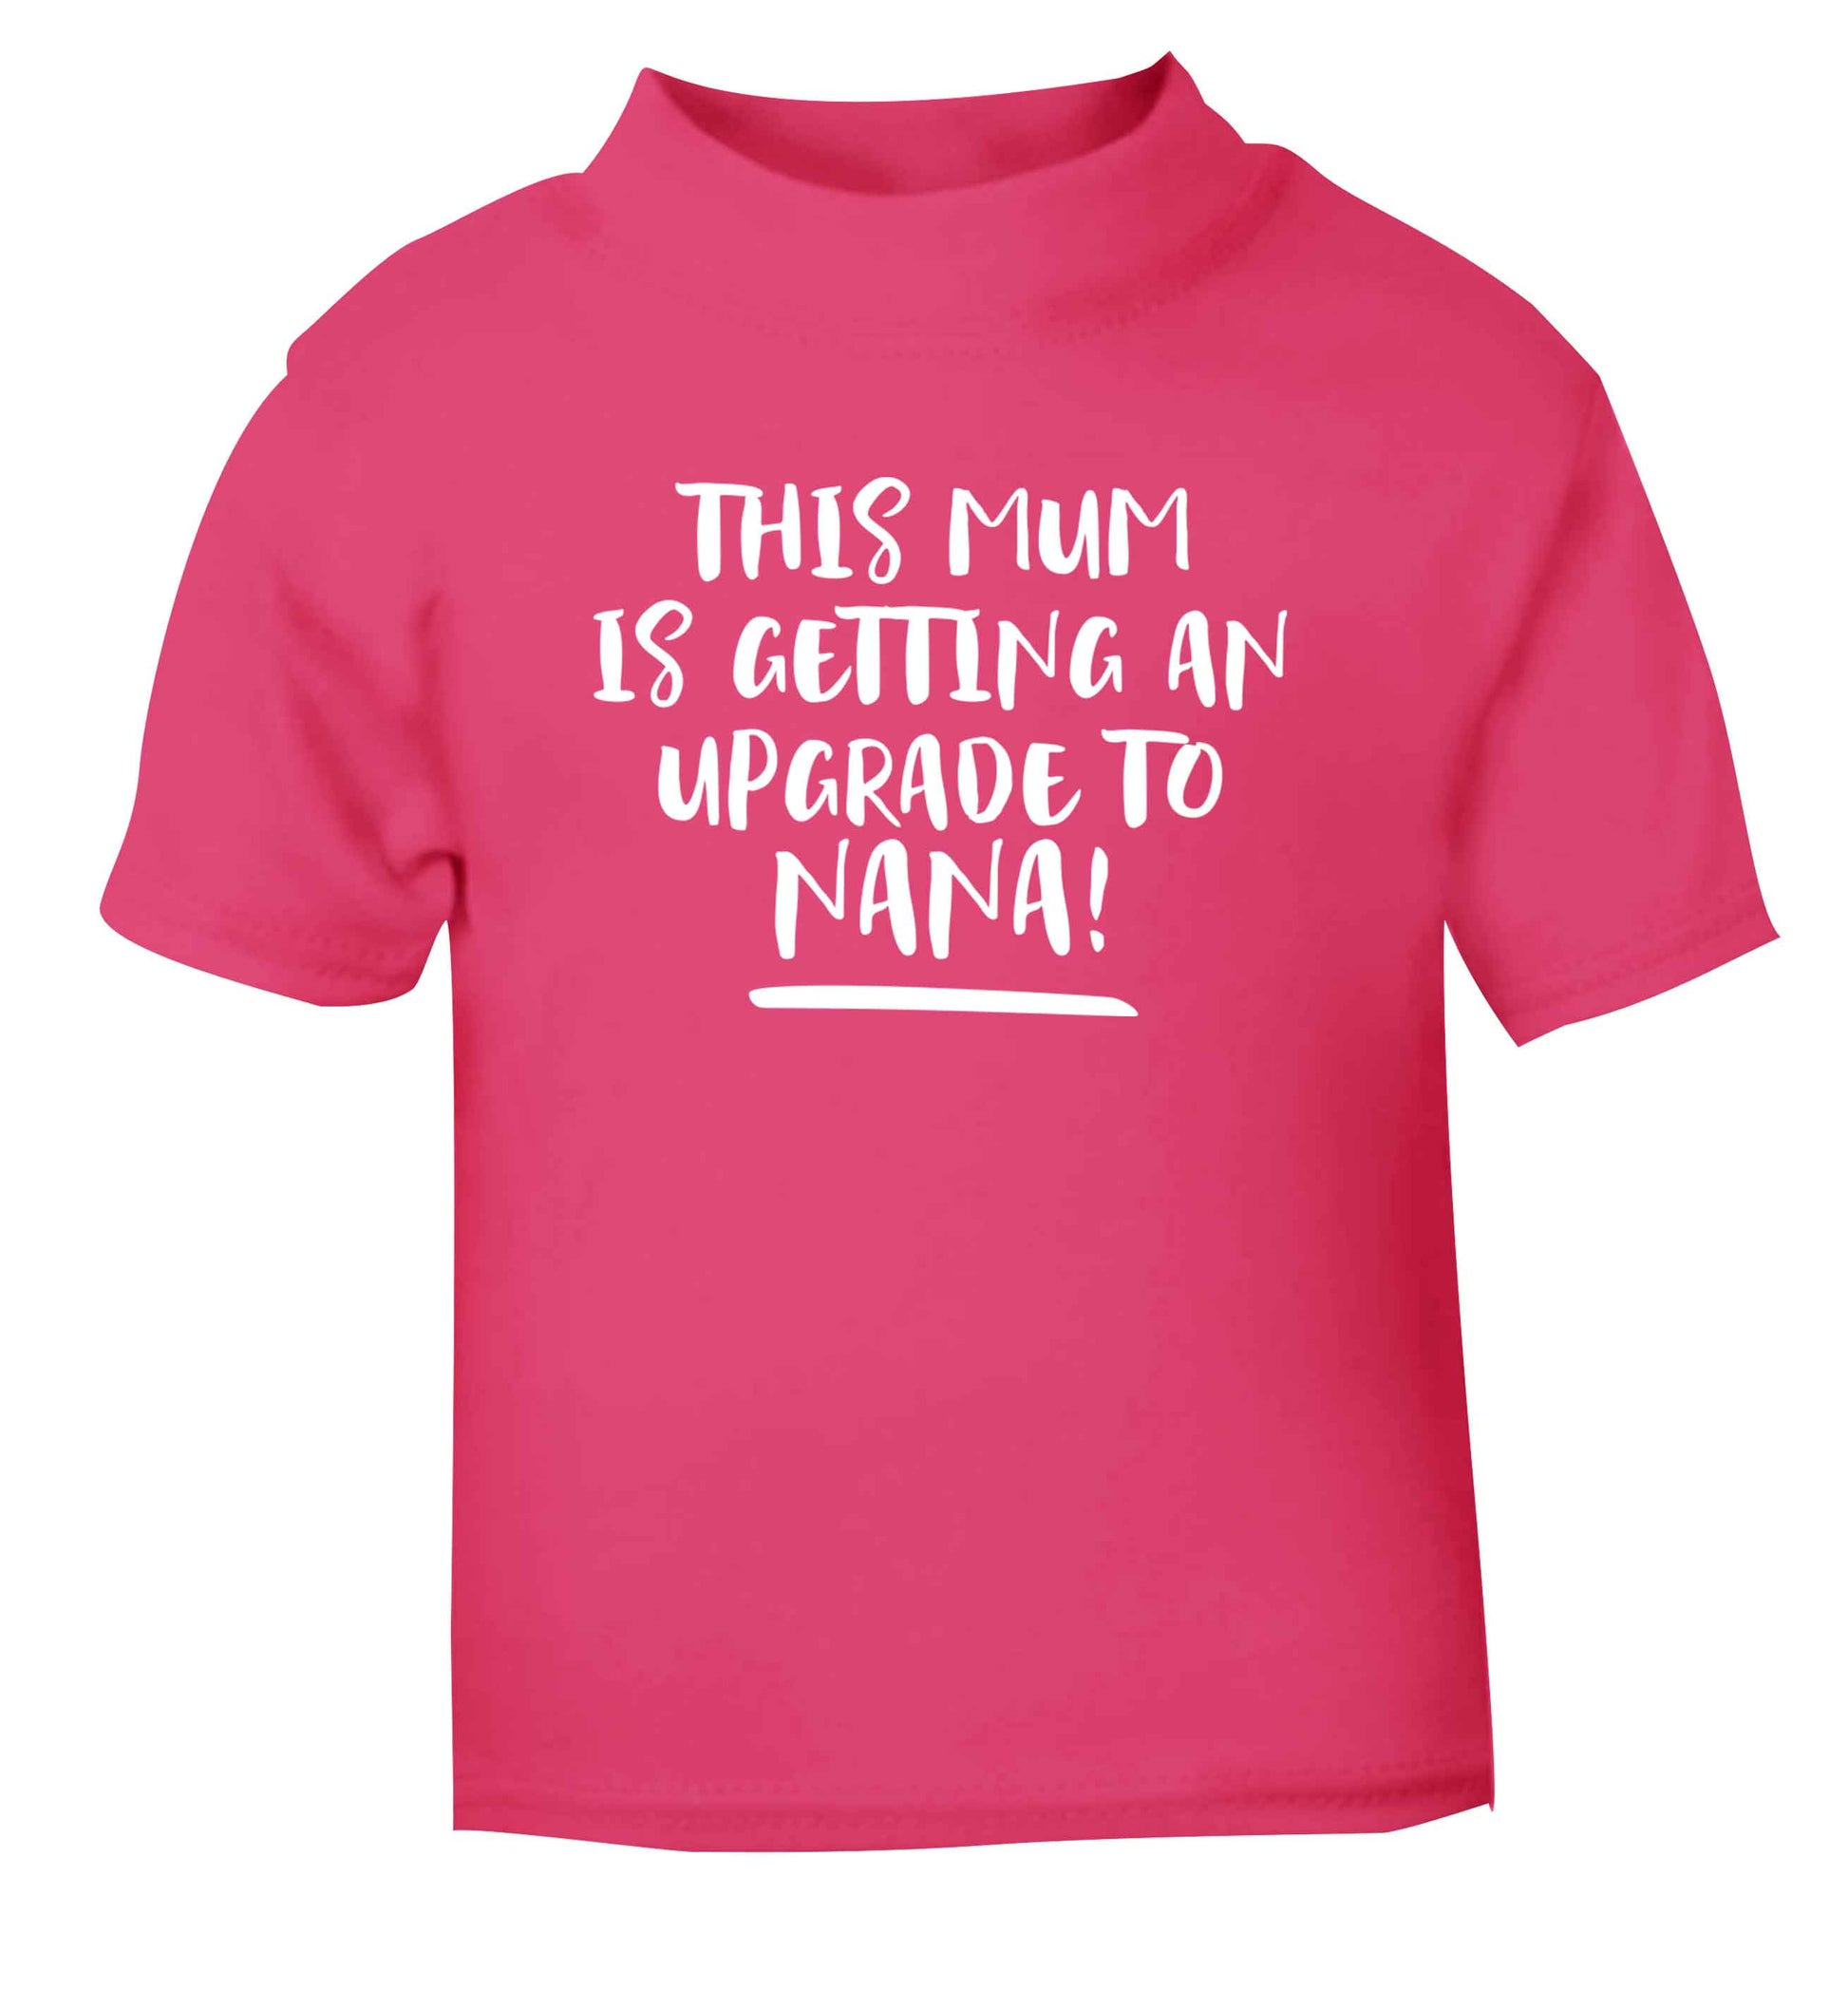 This mum is getting an upgrade to nana! pink Baby Toddler Tshirt 2 Years